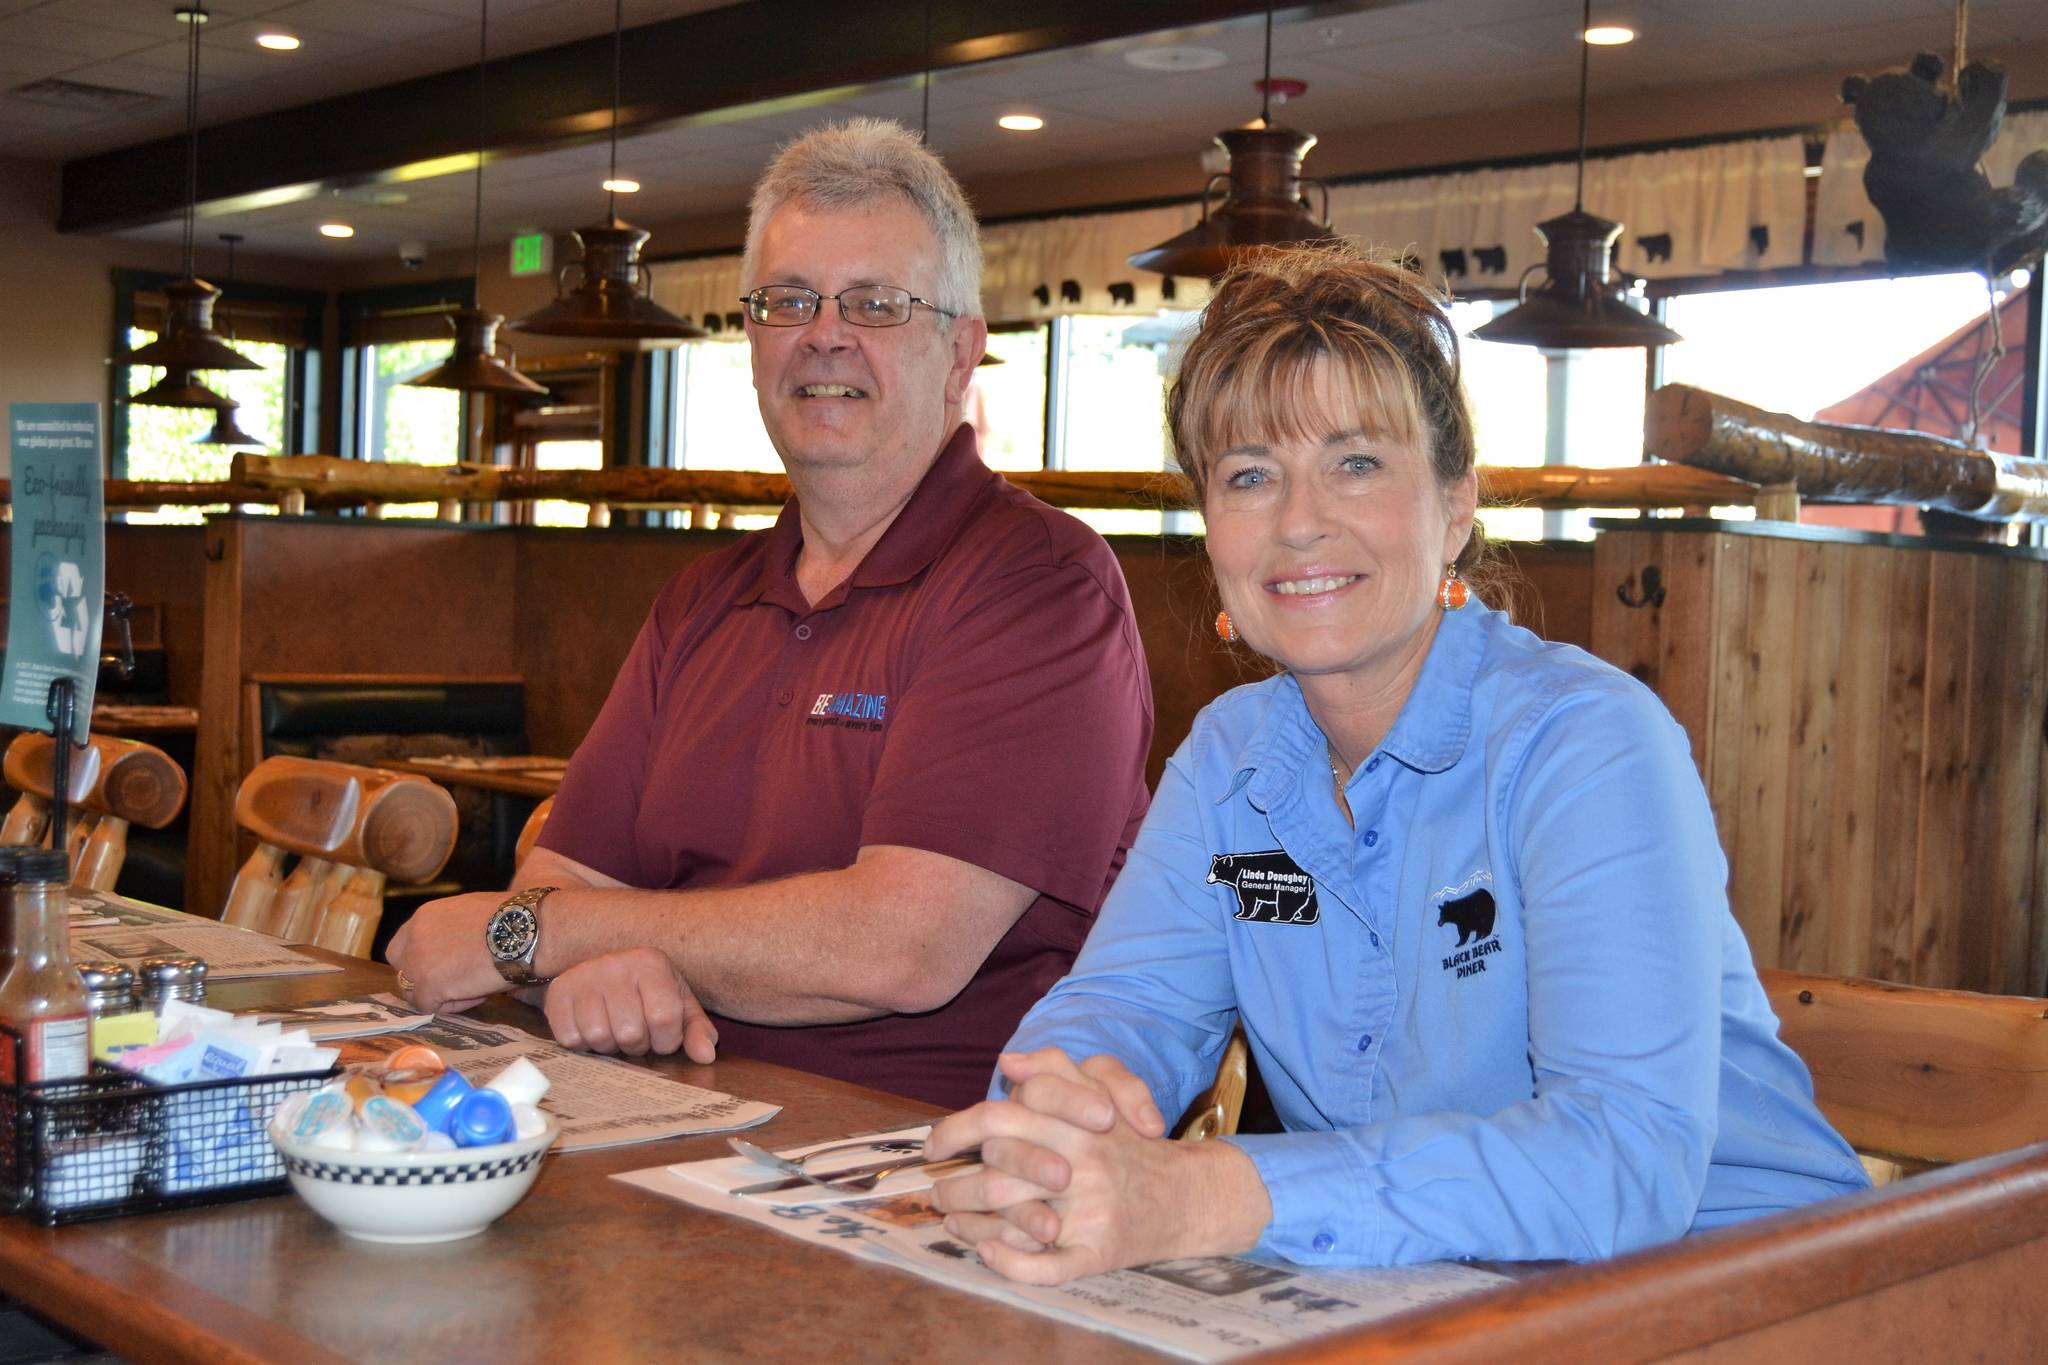 Sequim’s Black Bear Diner’s Assistant General Manager Bill Carmichael General Manager Linda Donaghay say the Sequim franchise has the largest annual sales growth since 2016. At 11 percent, the store’s sales growth is the most in the company, Donaghay said. Sequim Gazette photo by Matthew Nash